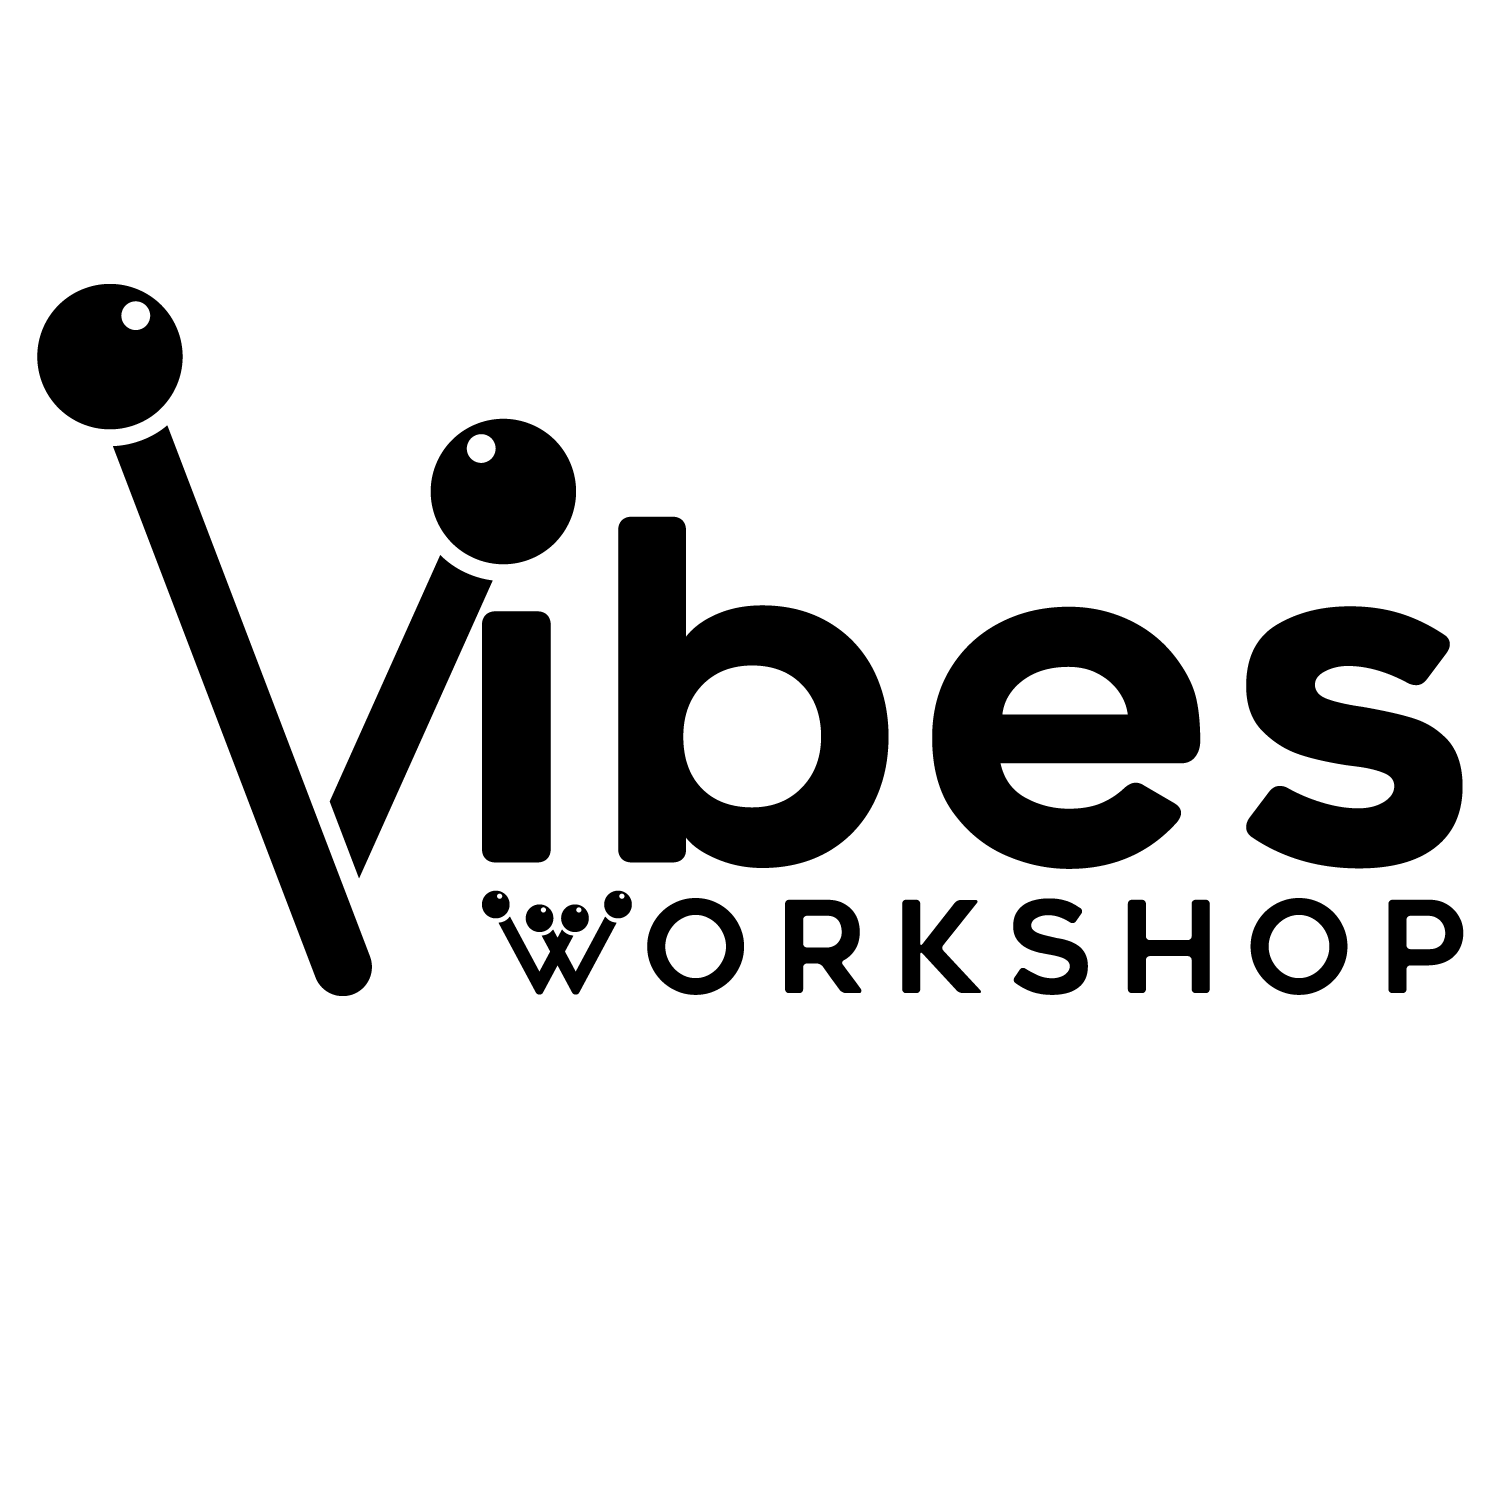 Vibes-Workshop-W-Mallet-White-Background.png